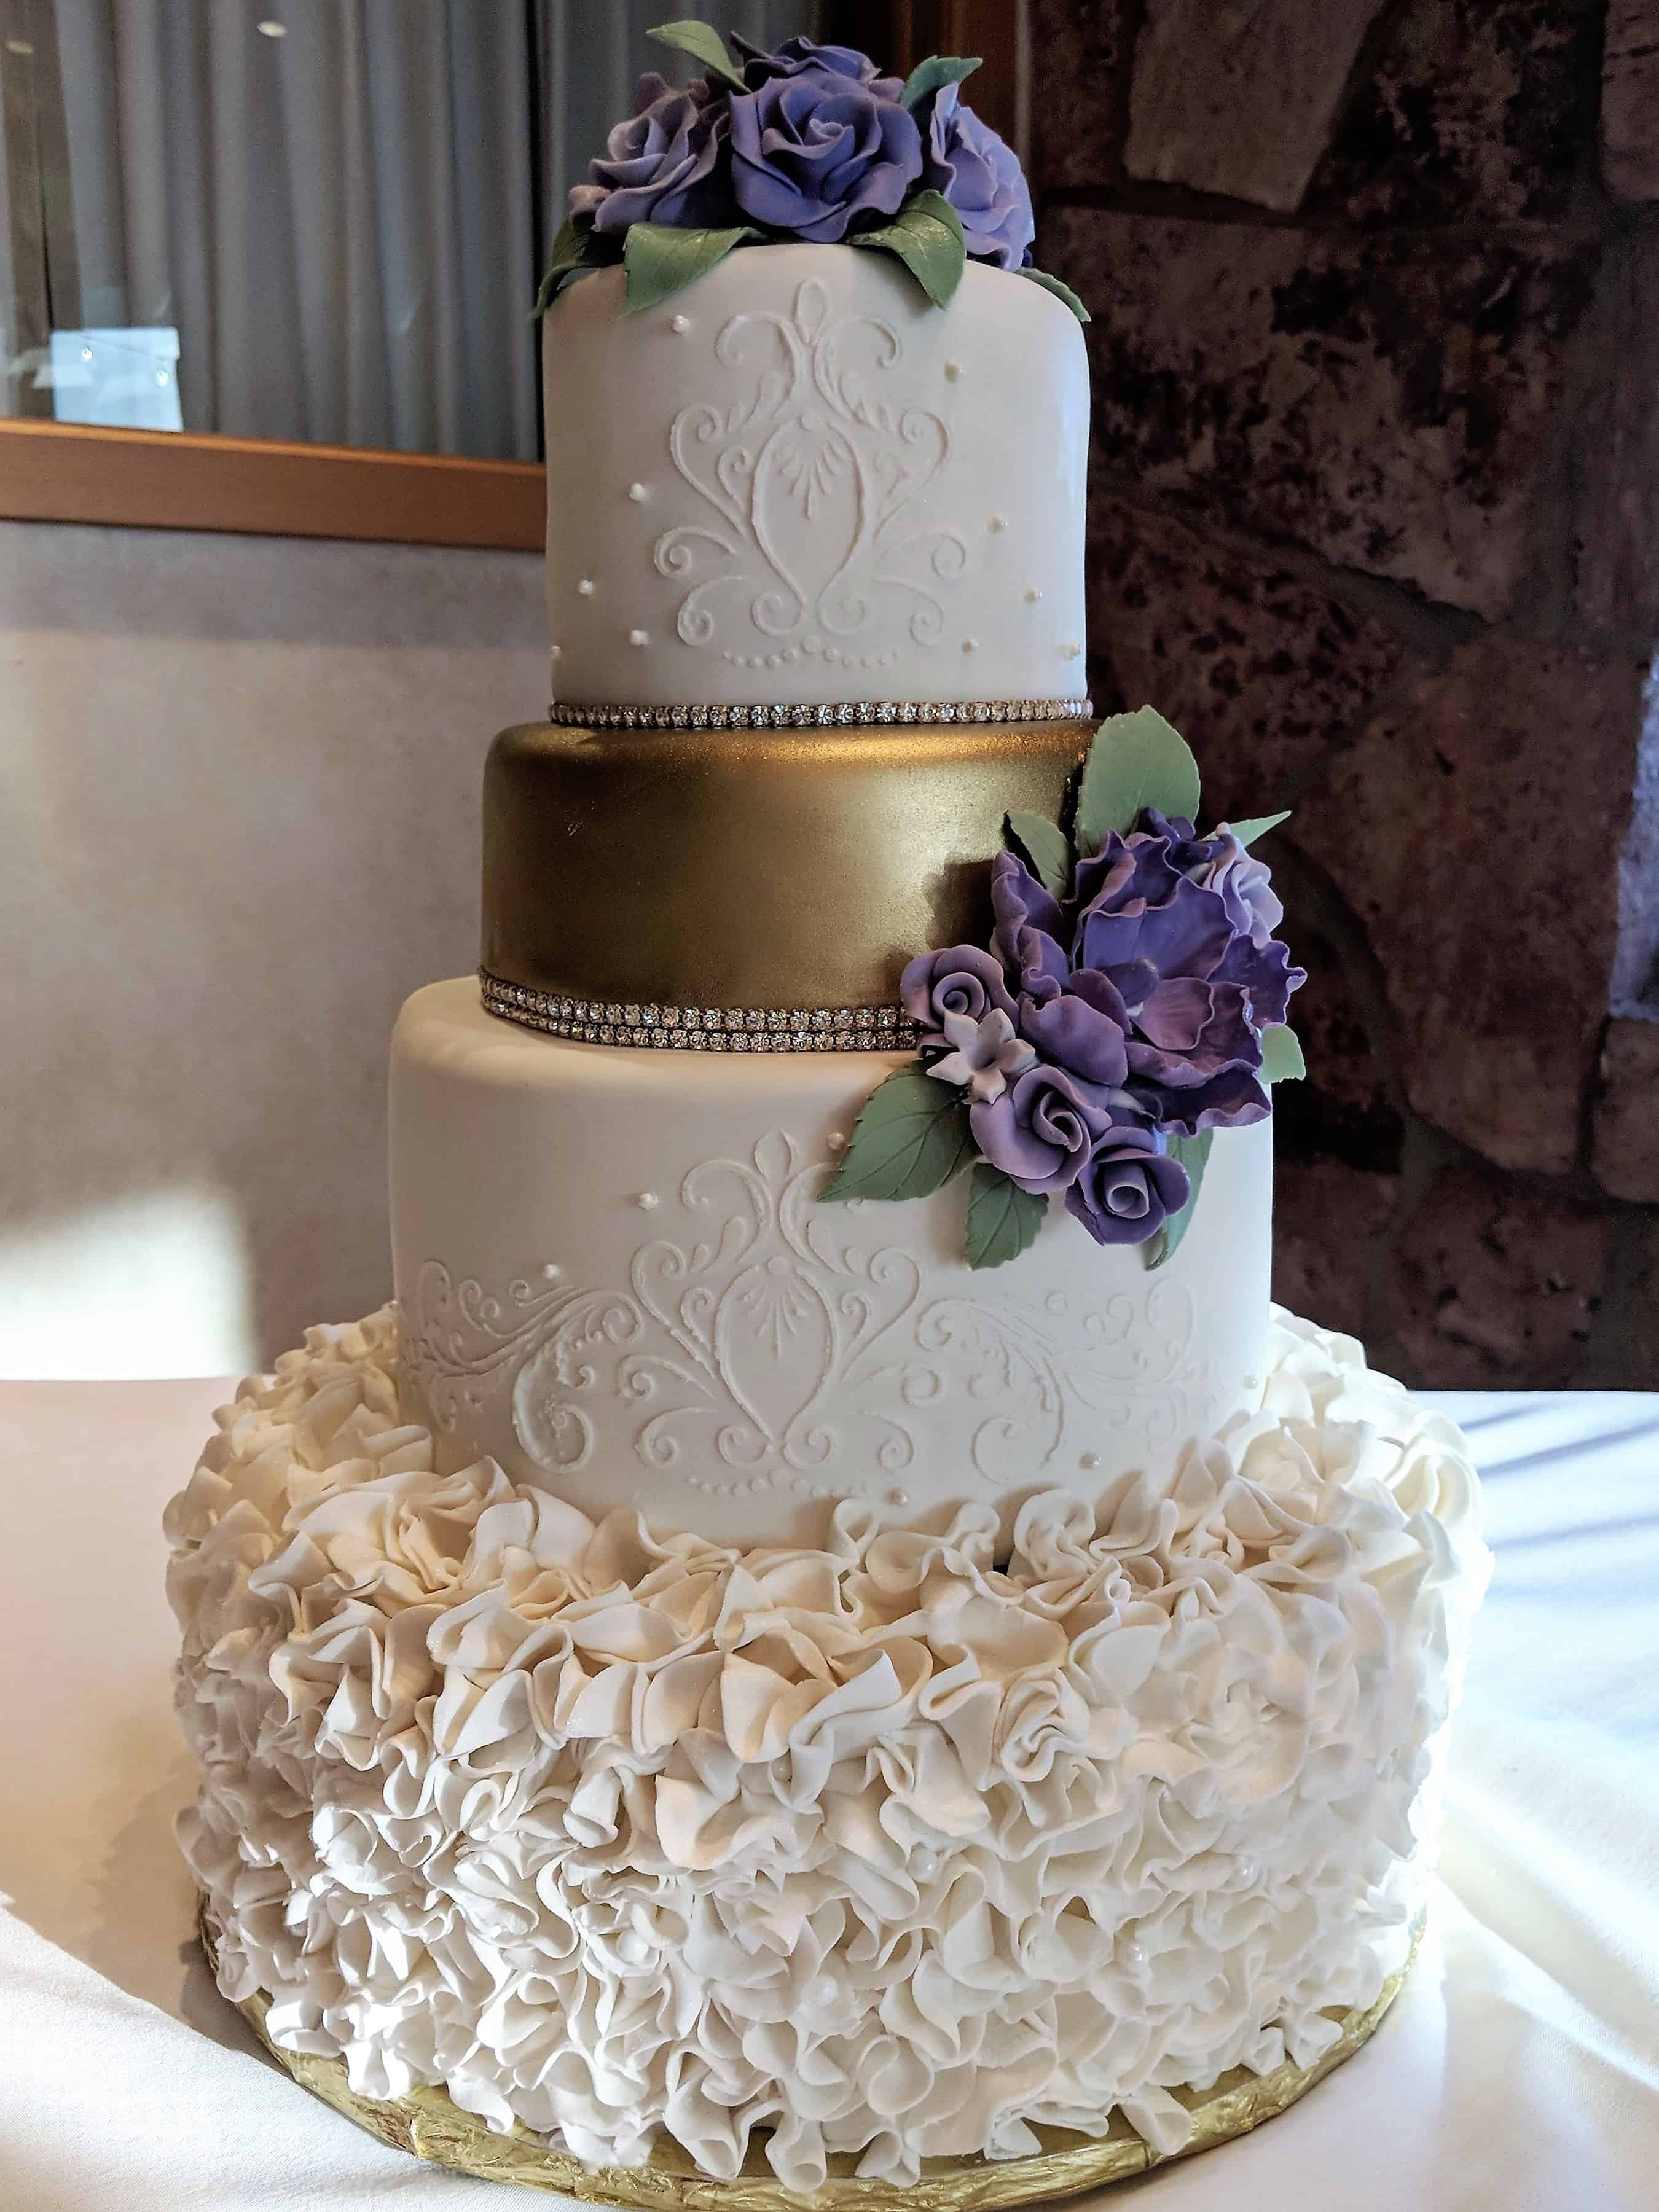 Ruffles and Gold Tier Wedding Cake